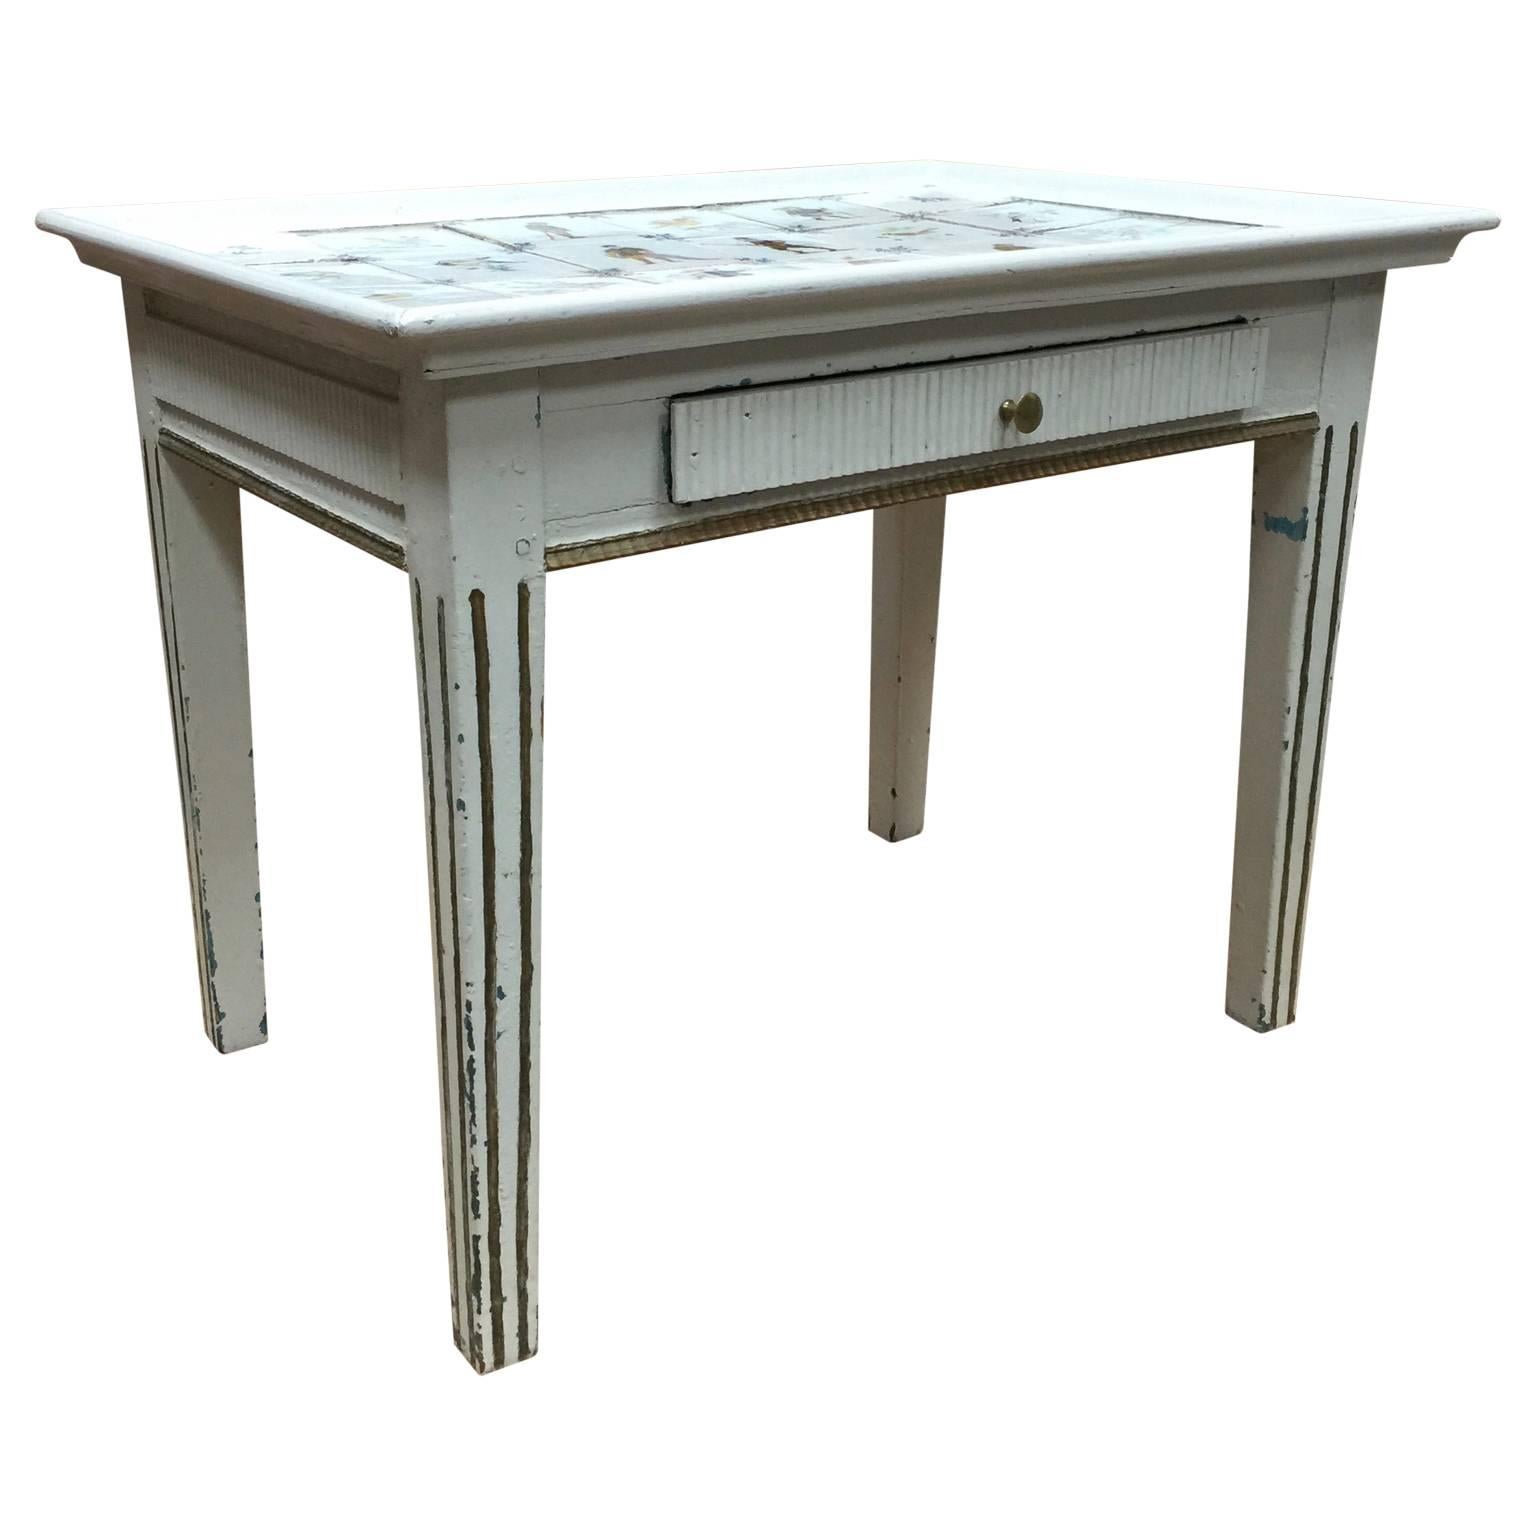 Gustavian table with one-drawer. Tabletop with inlaid with polychrome colored delft tiles.